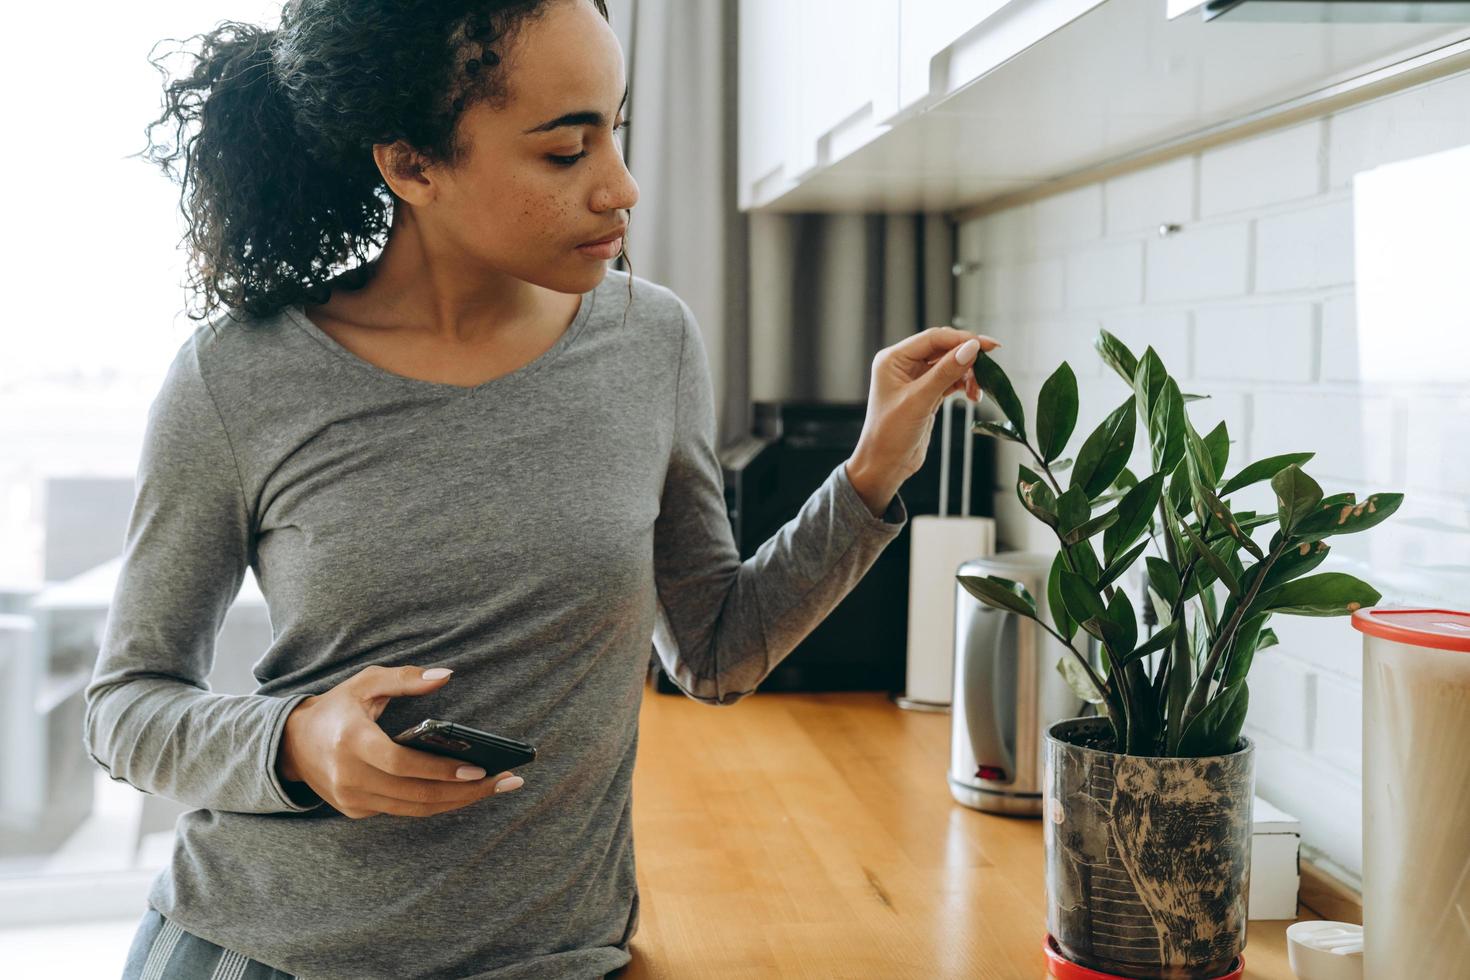 Black woman using mobile phone while standing at kitchen photo